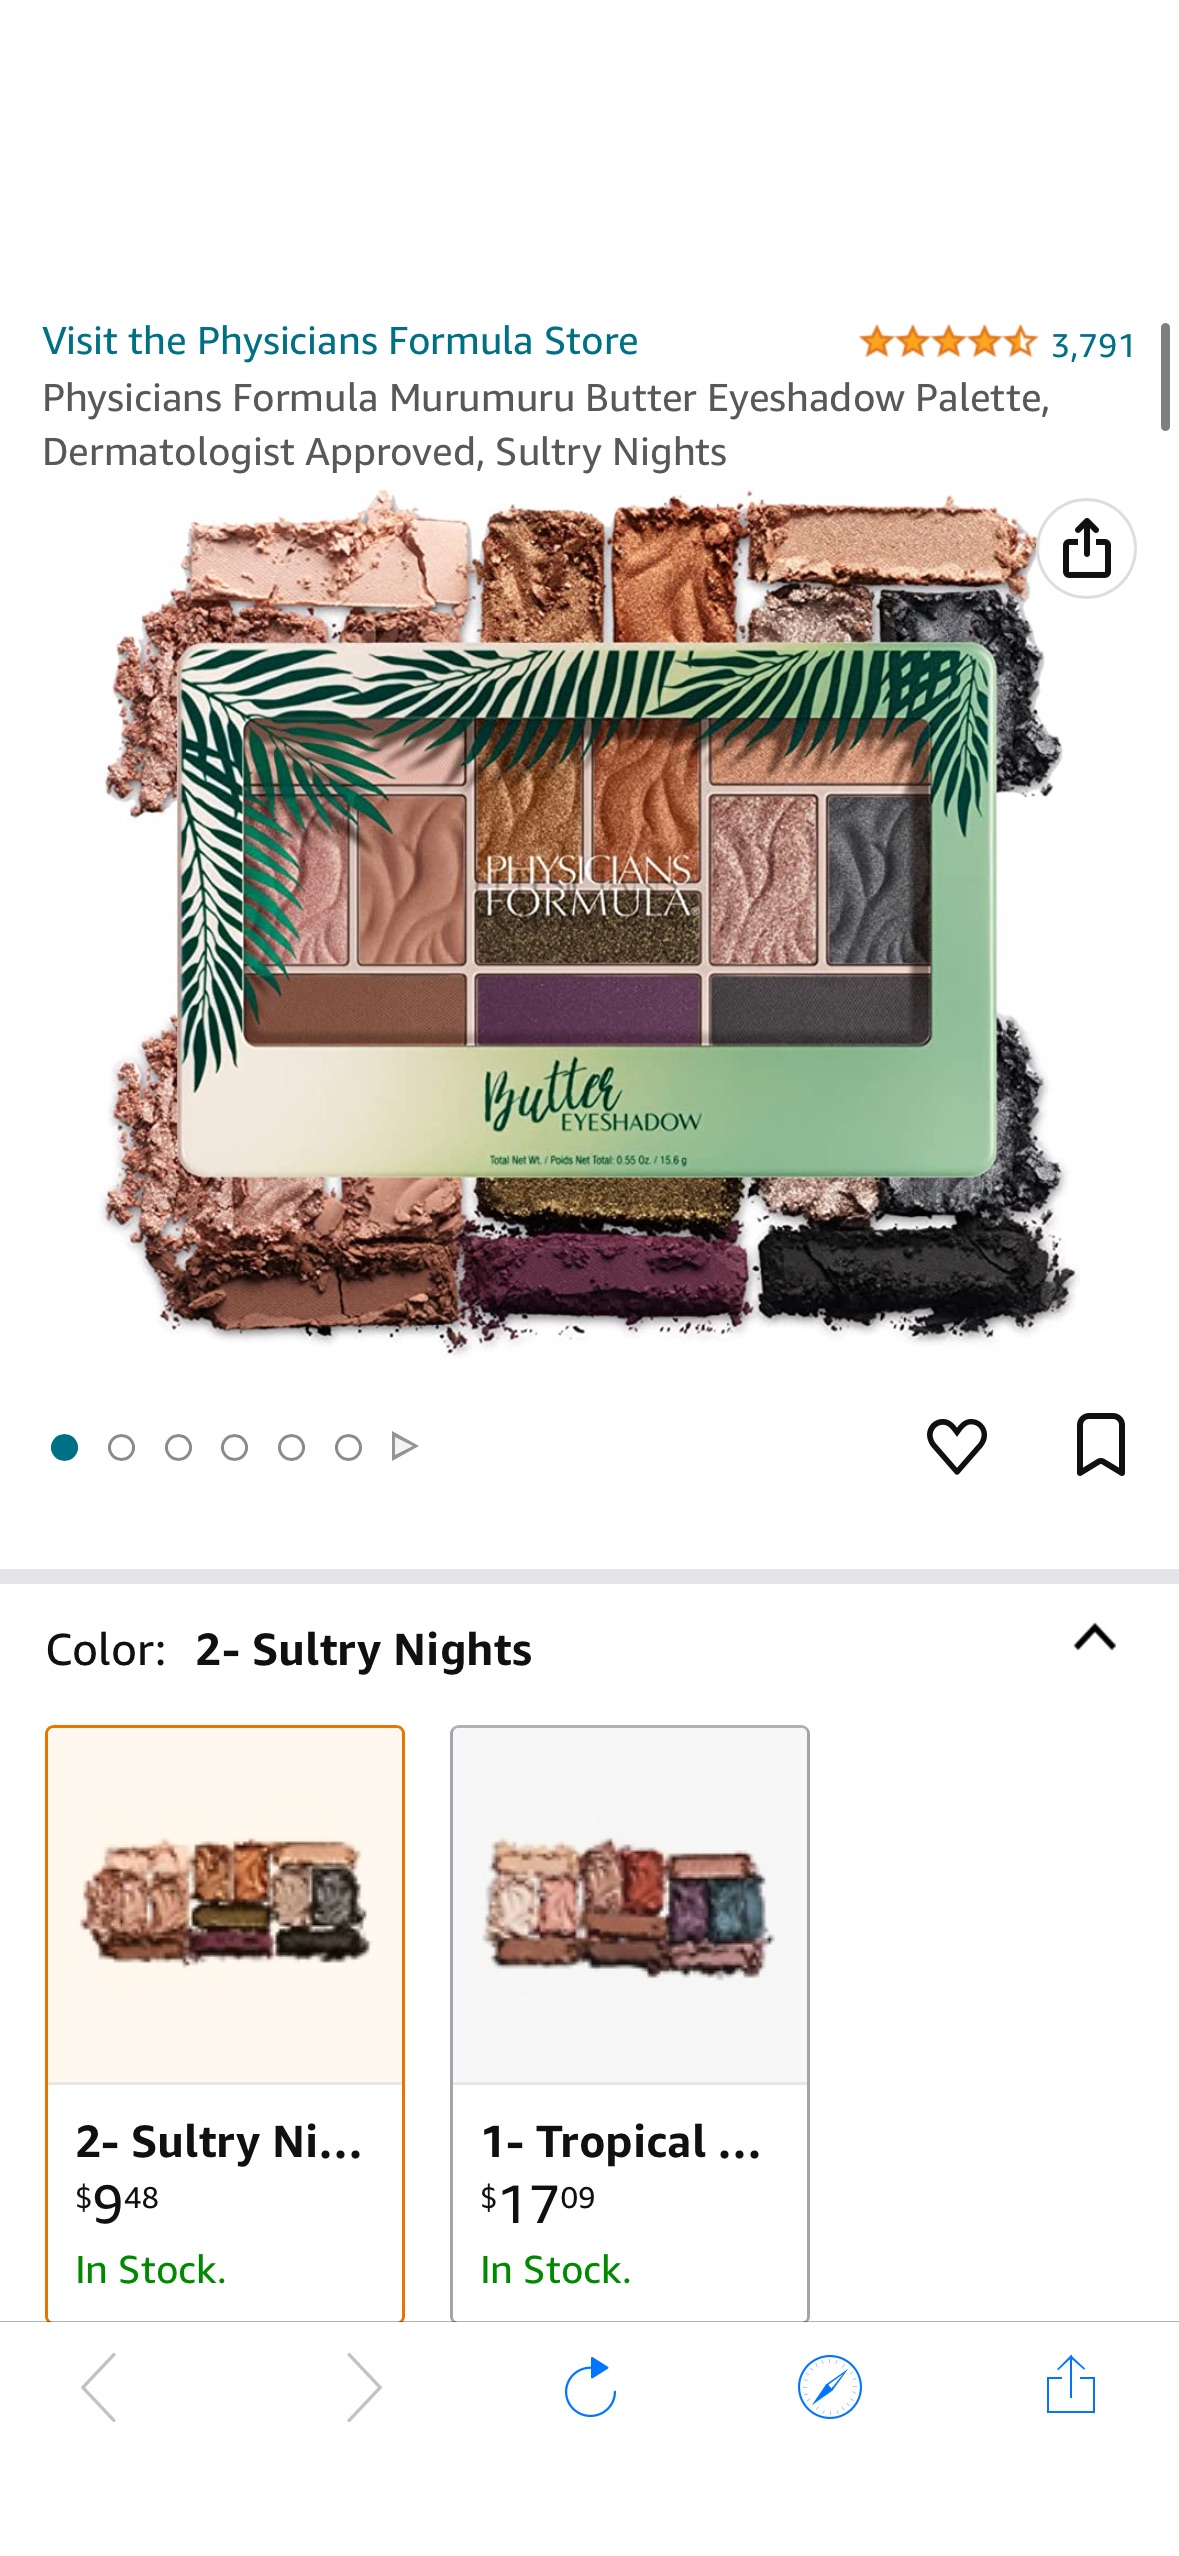 Amazon.com : Physicians Formula Murumuru Butter Eyeshadow Palette, Dermatologist Approved, Sultry Nights : Beauty & Personal Care